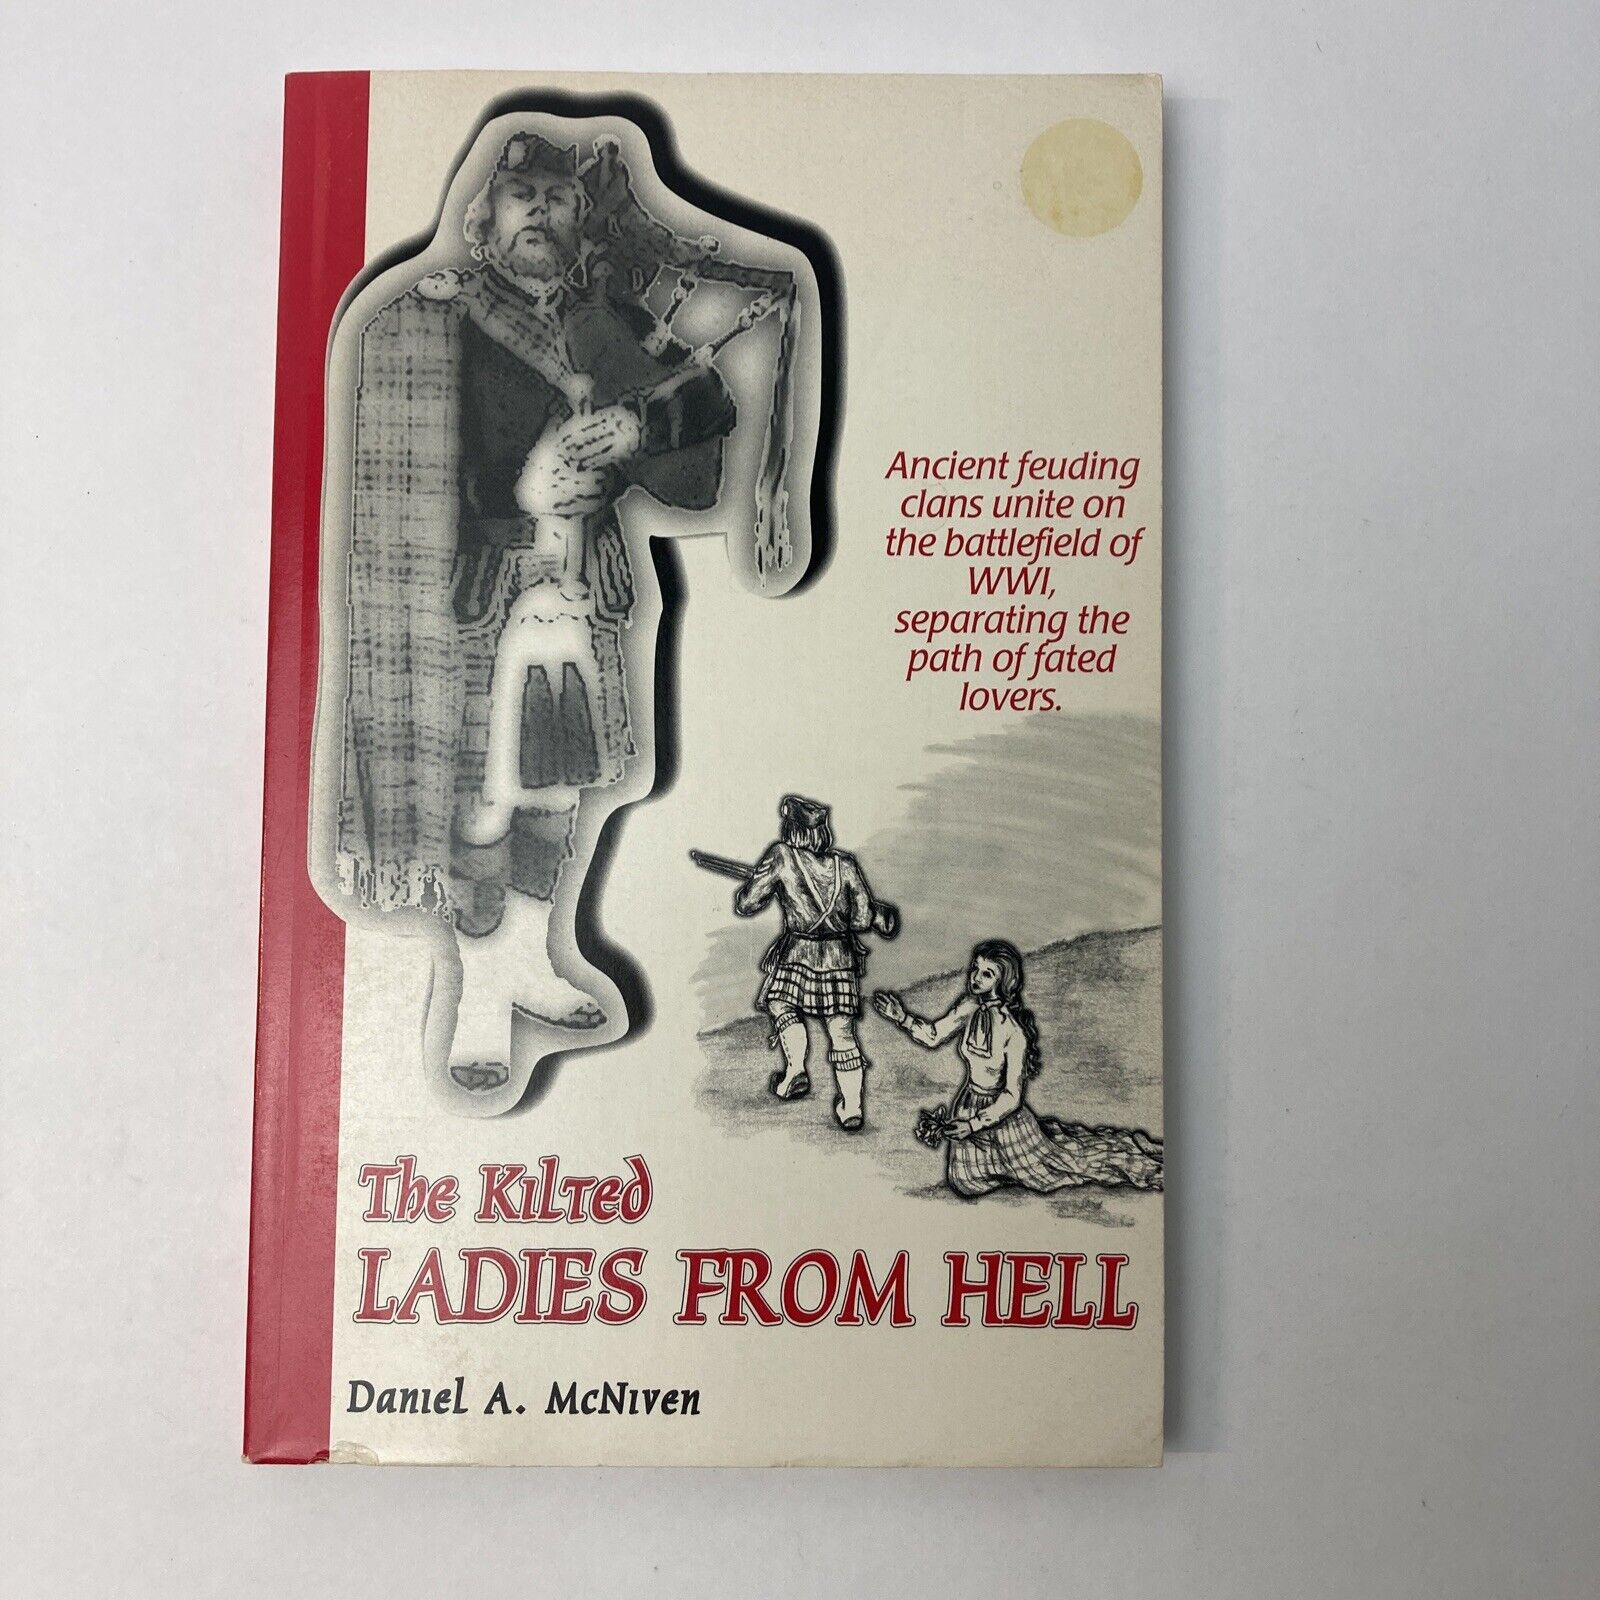 The Kilted Ladies from Hell WWI Feuding Clans Daniel A McNiven Paperback 1996